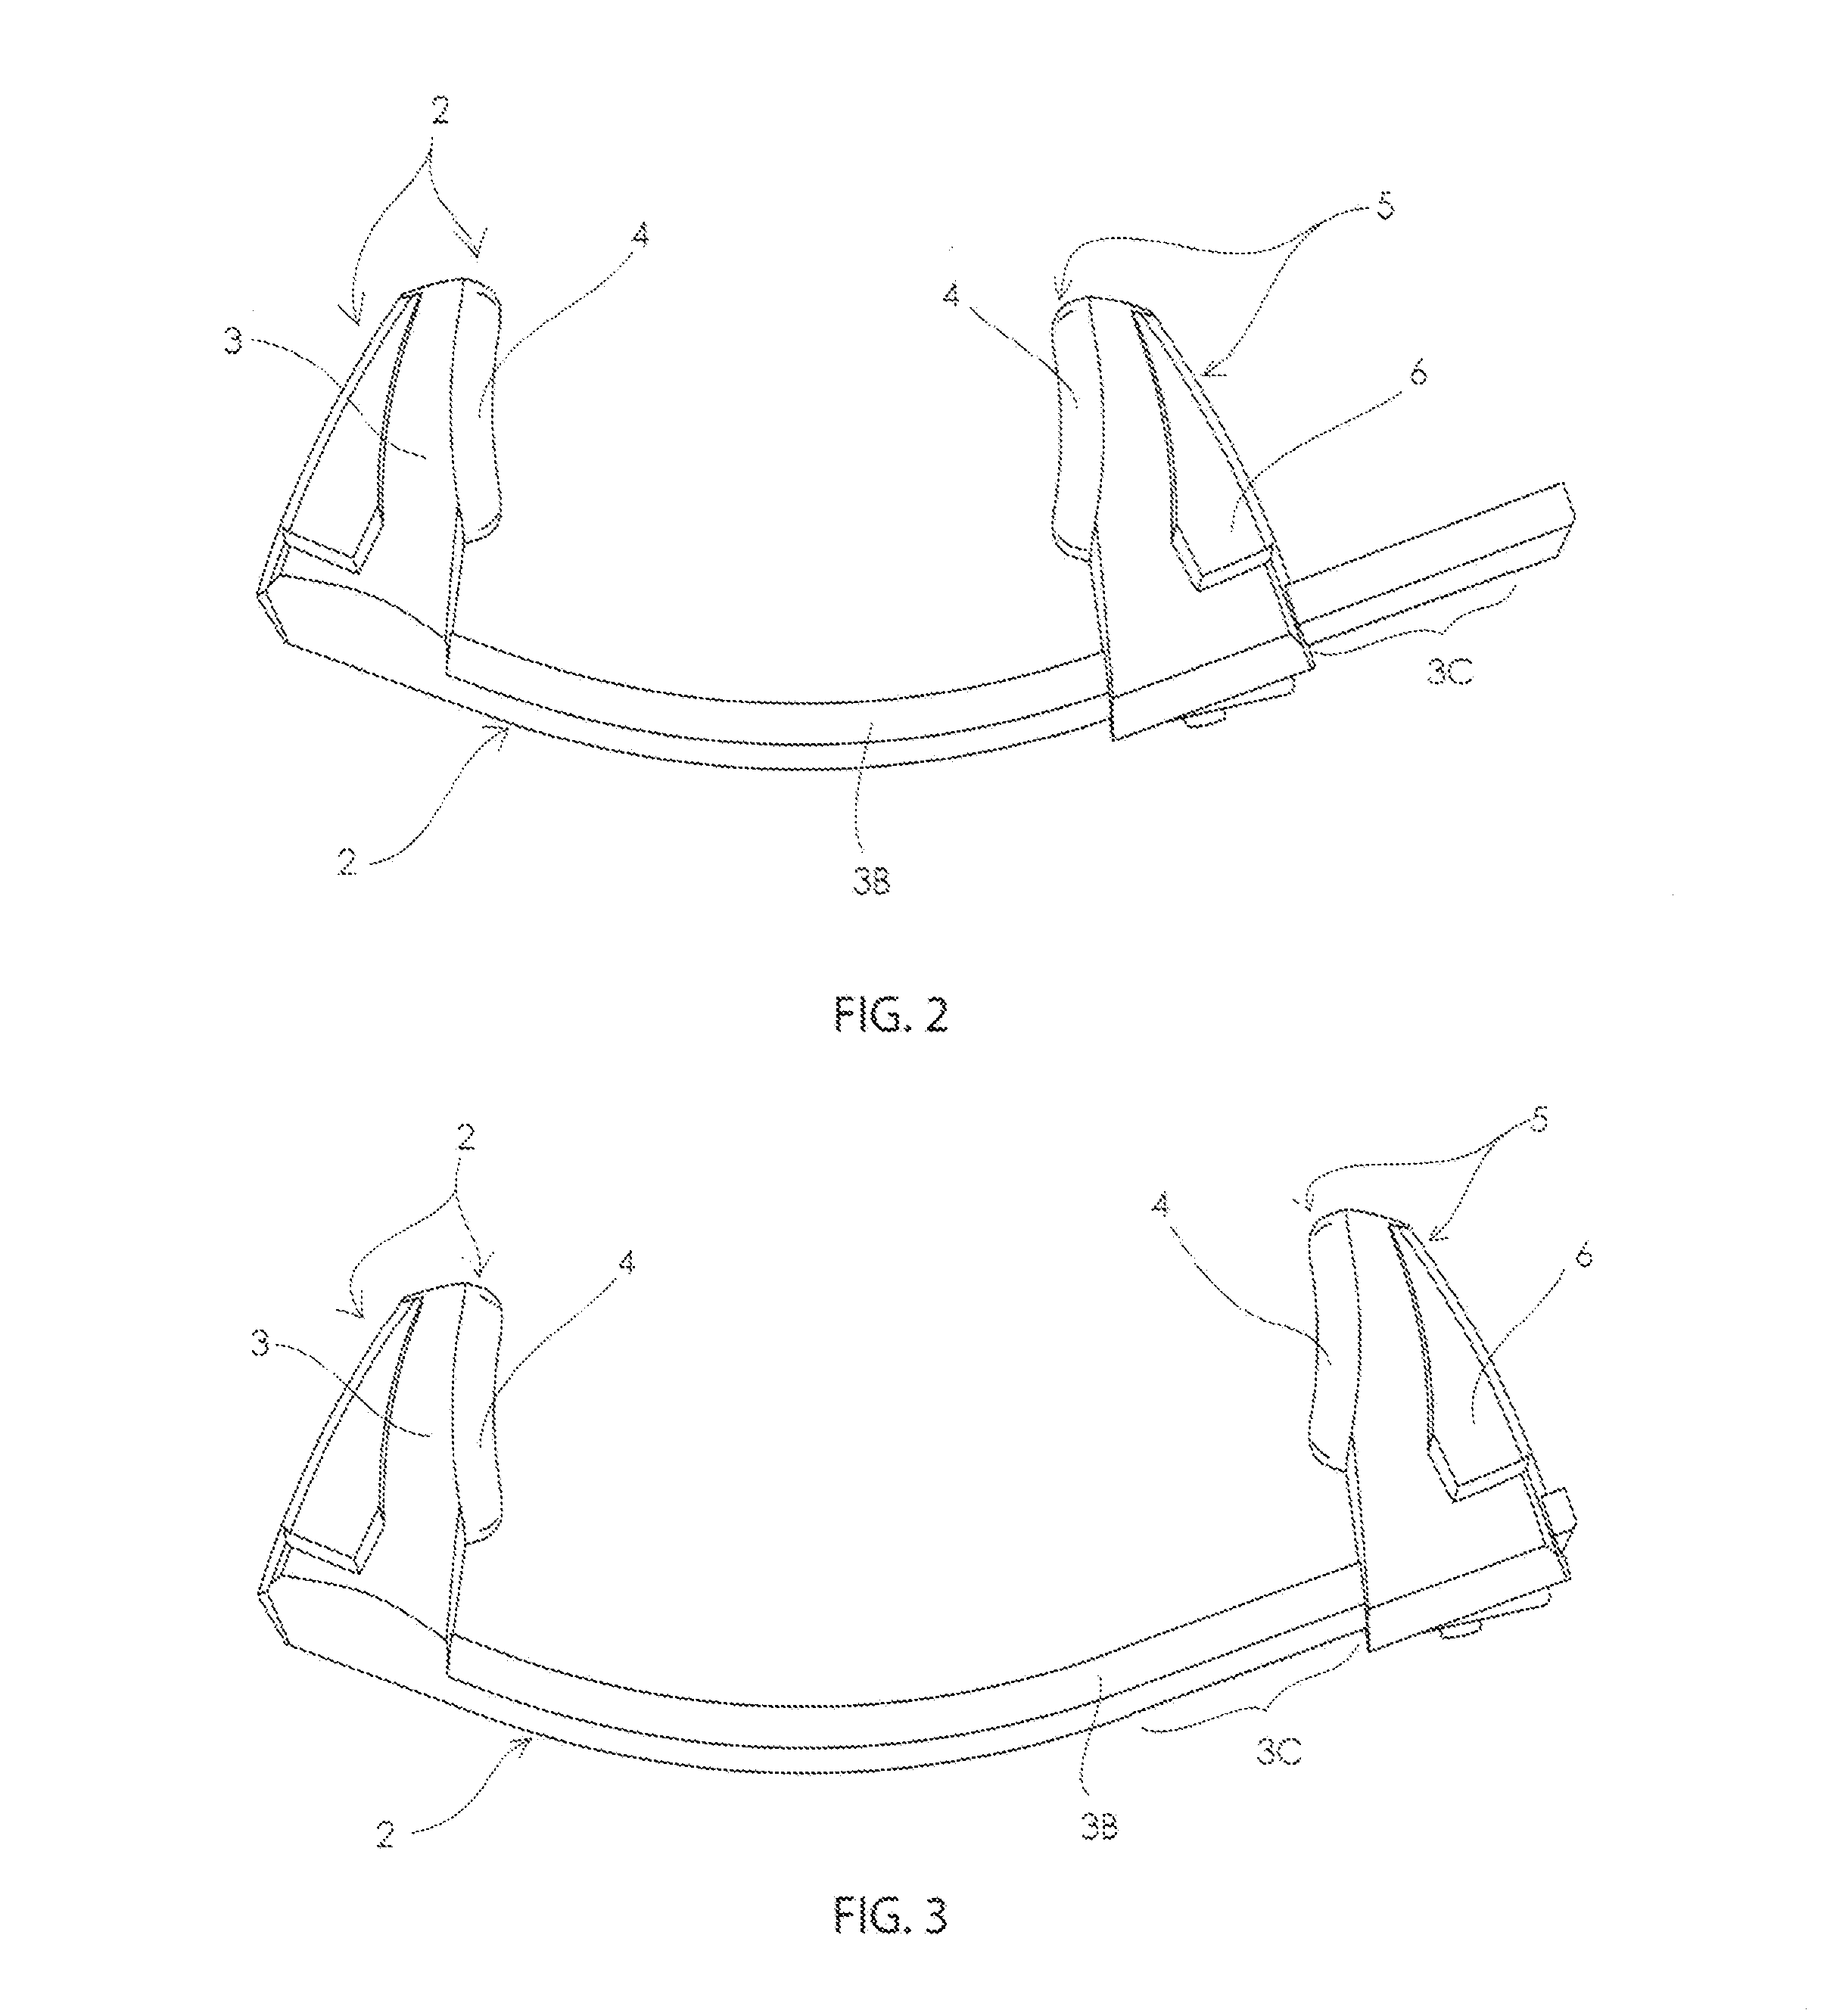 Apparatus for stabilization of pelvic fractures